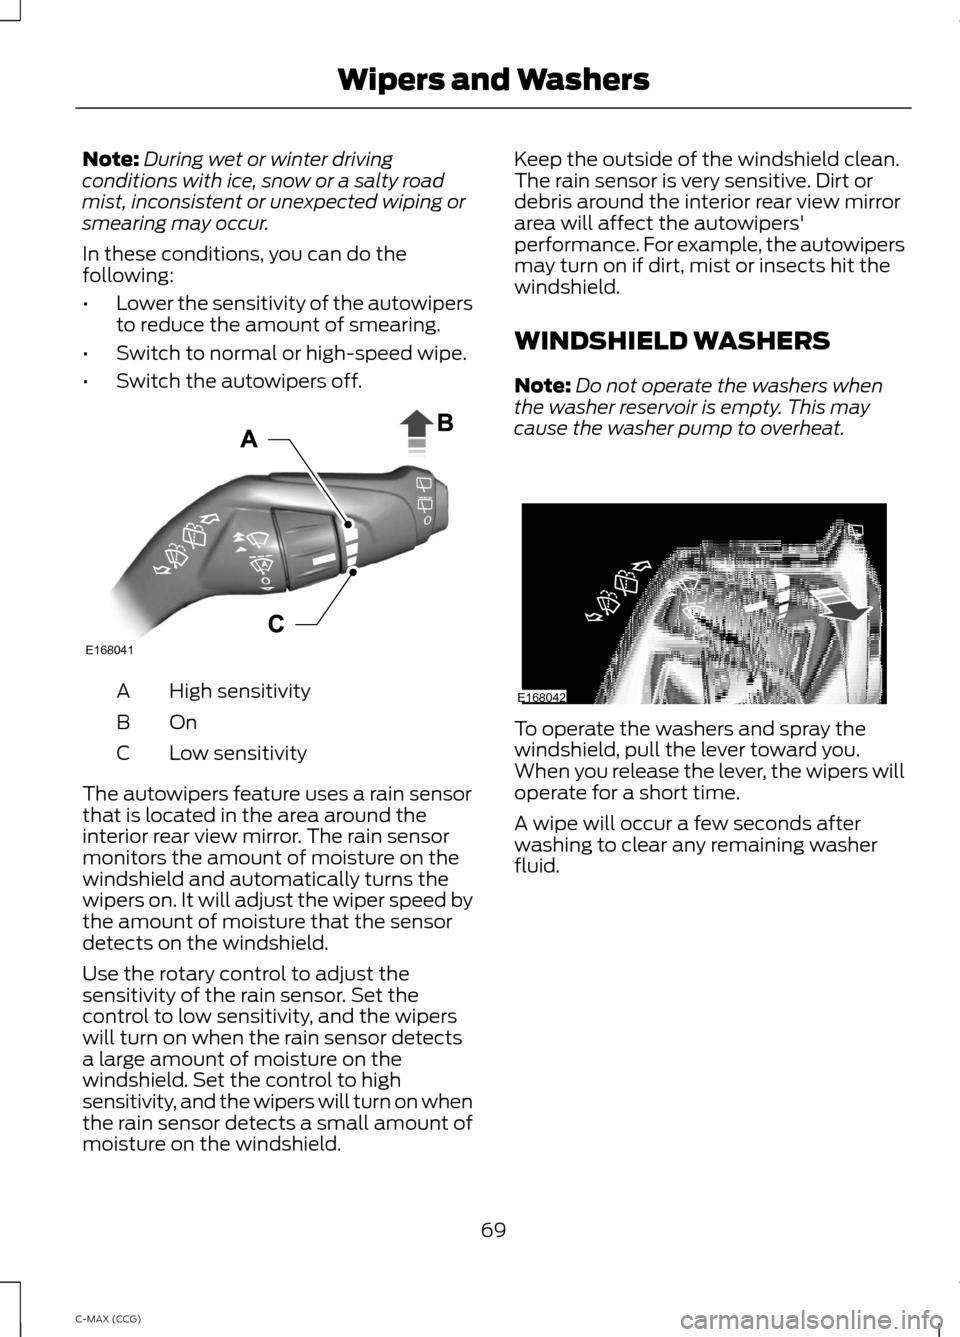 FORD C MAX HYBRID 2014 2.G Manual PDF Note:
During wet or winter driving
conditions with ice, snow or a salty road
mist, inconsistent or unexpected wiping or
smearing may occur.
In these conditions, you can do the
following:
• Lower the